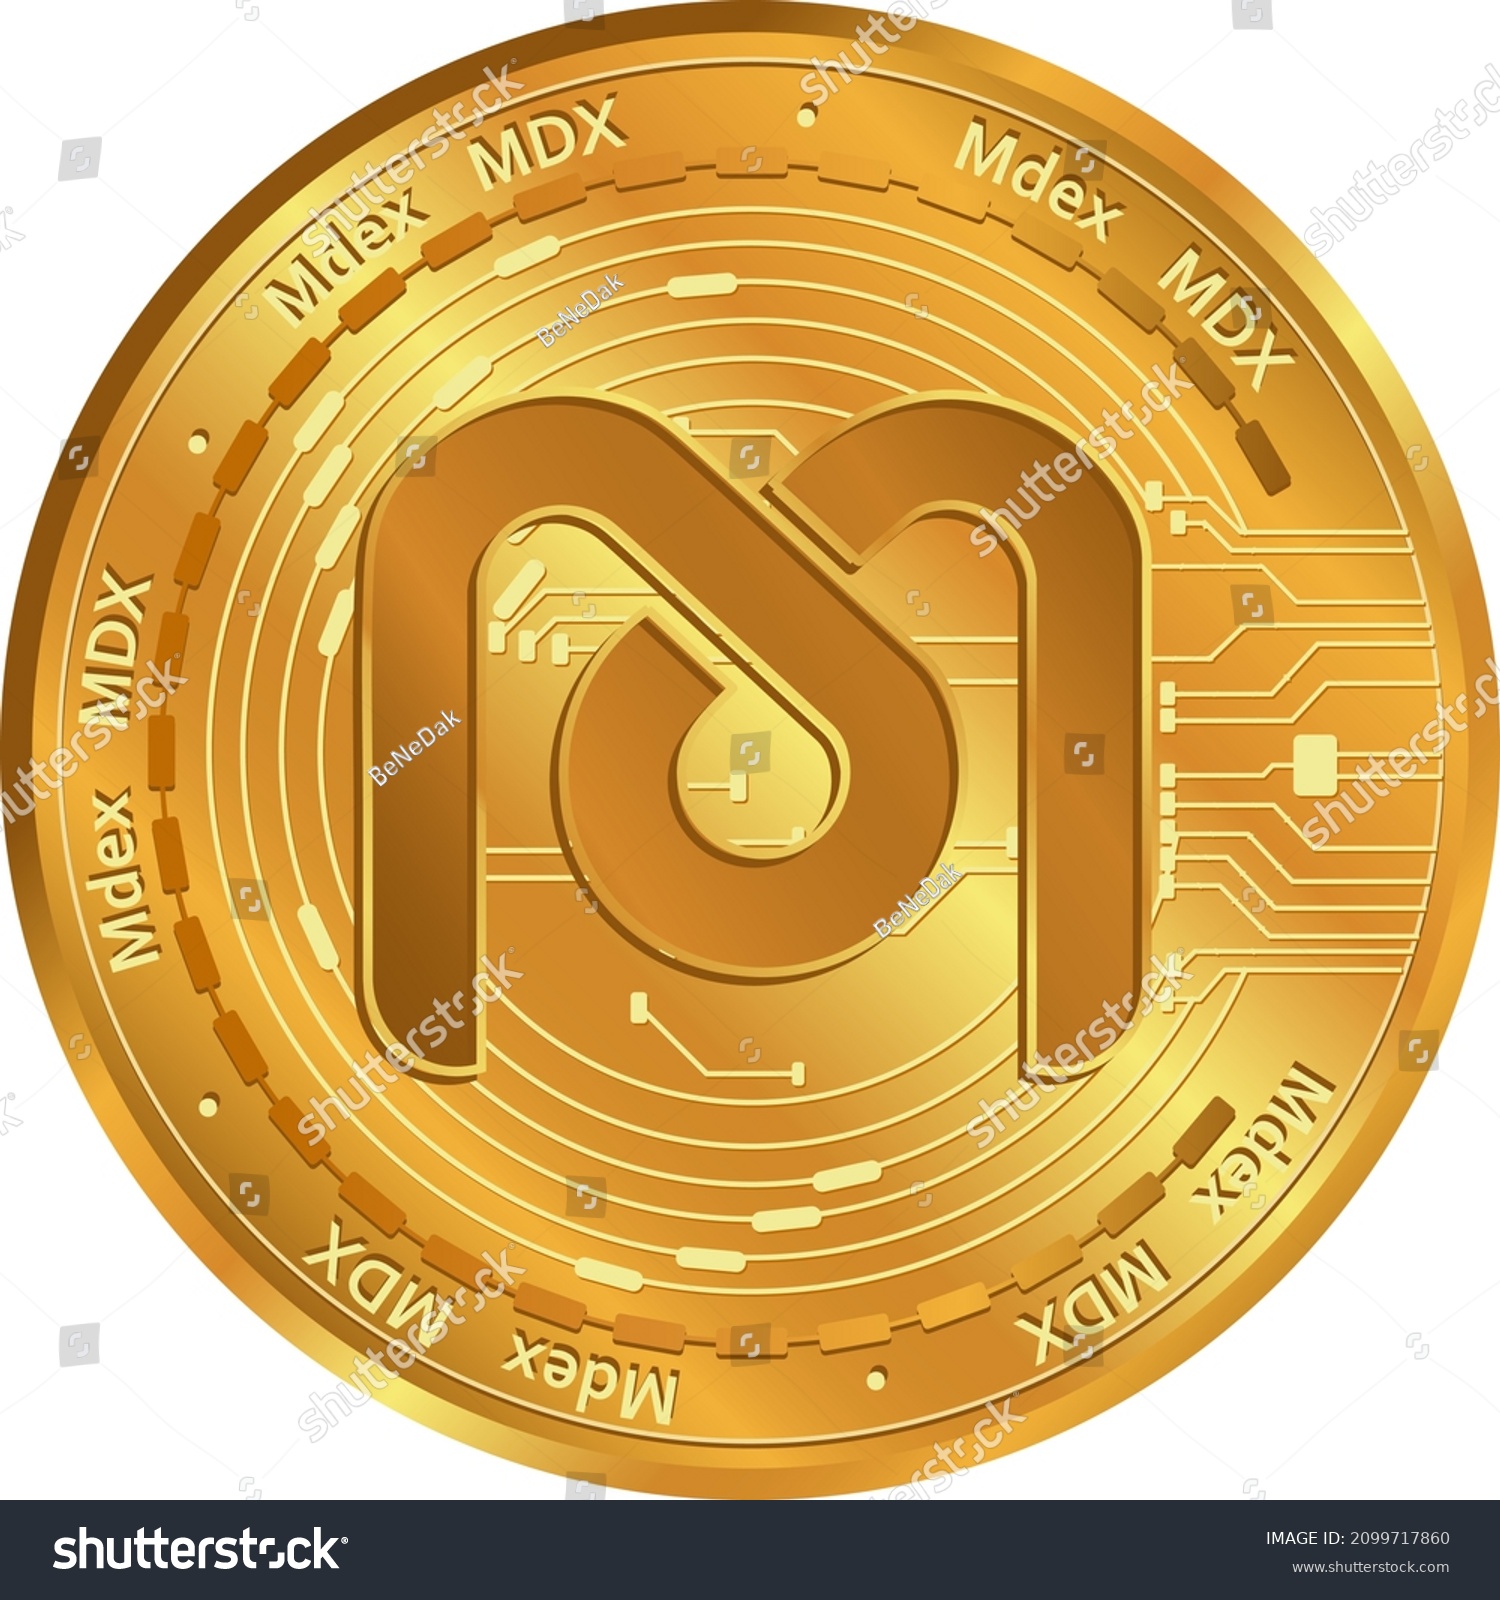 SVG of mdex (MDX) currency coin isolated.Digital finance exchange concept. svg